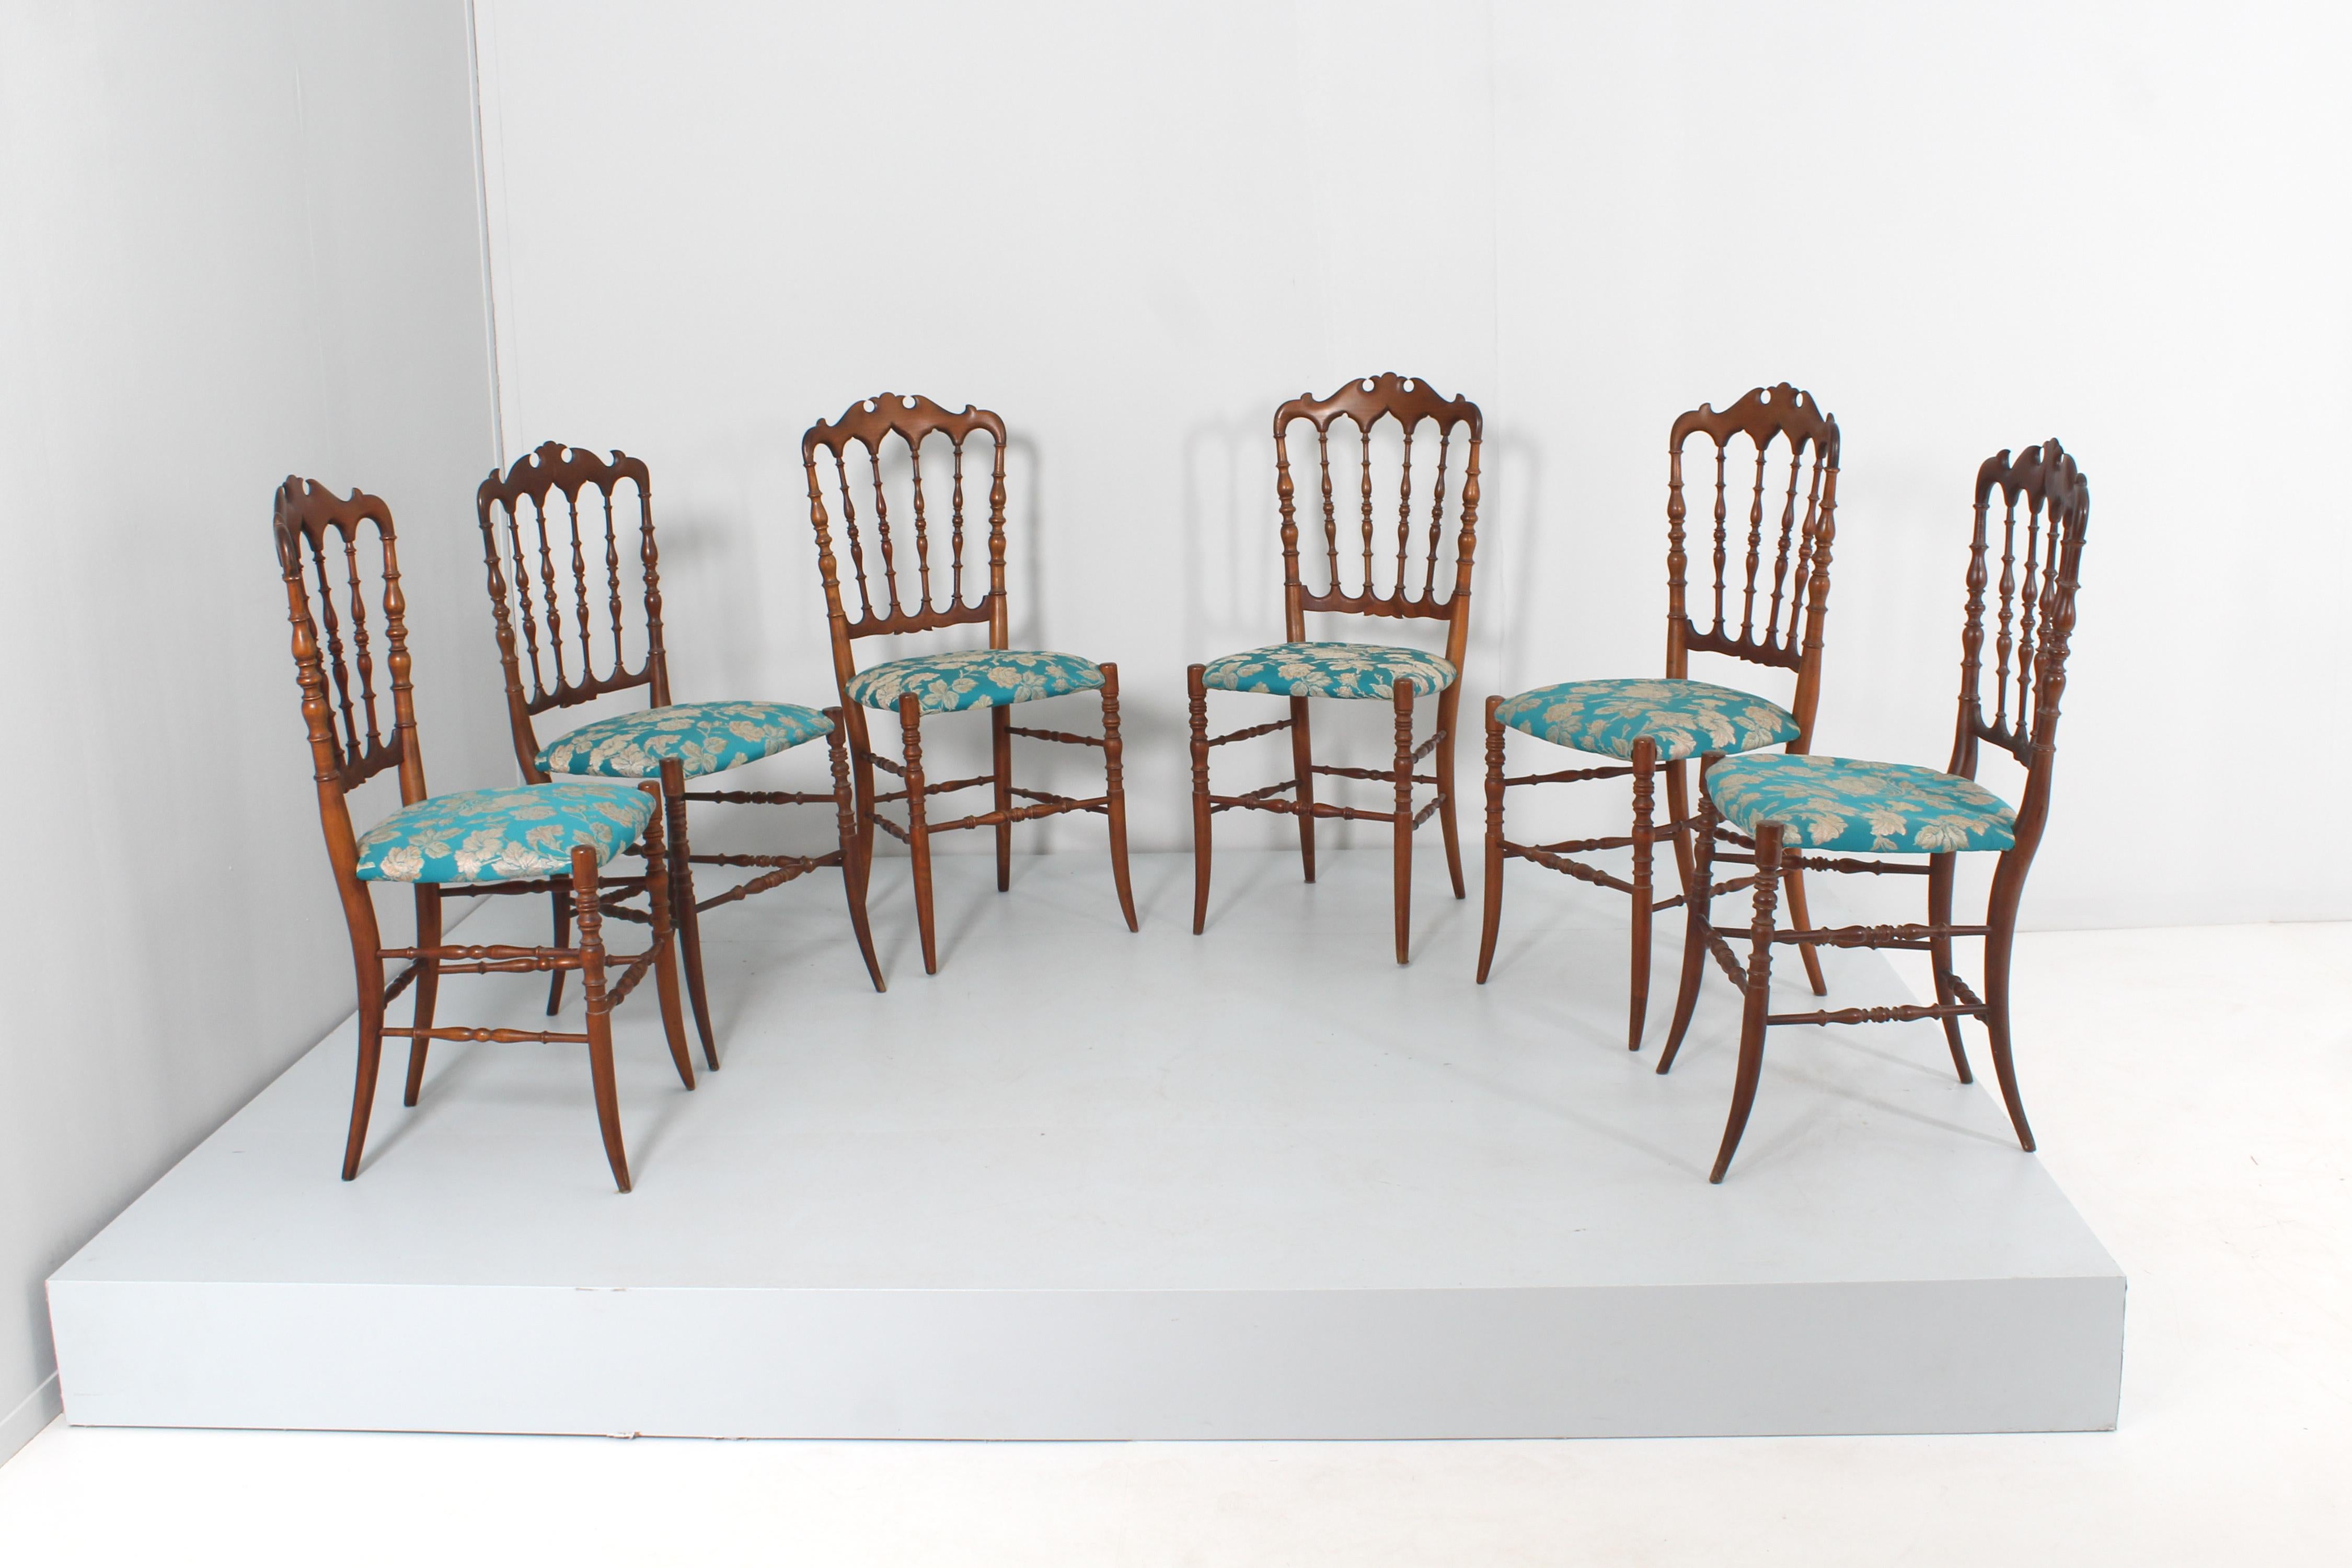 Mid-20th Century Mid-Century Chiavarina Wooden Chairs Set of 6, 1950s, Italy For Sale